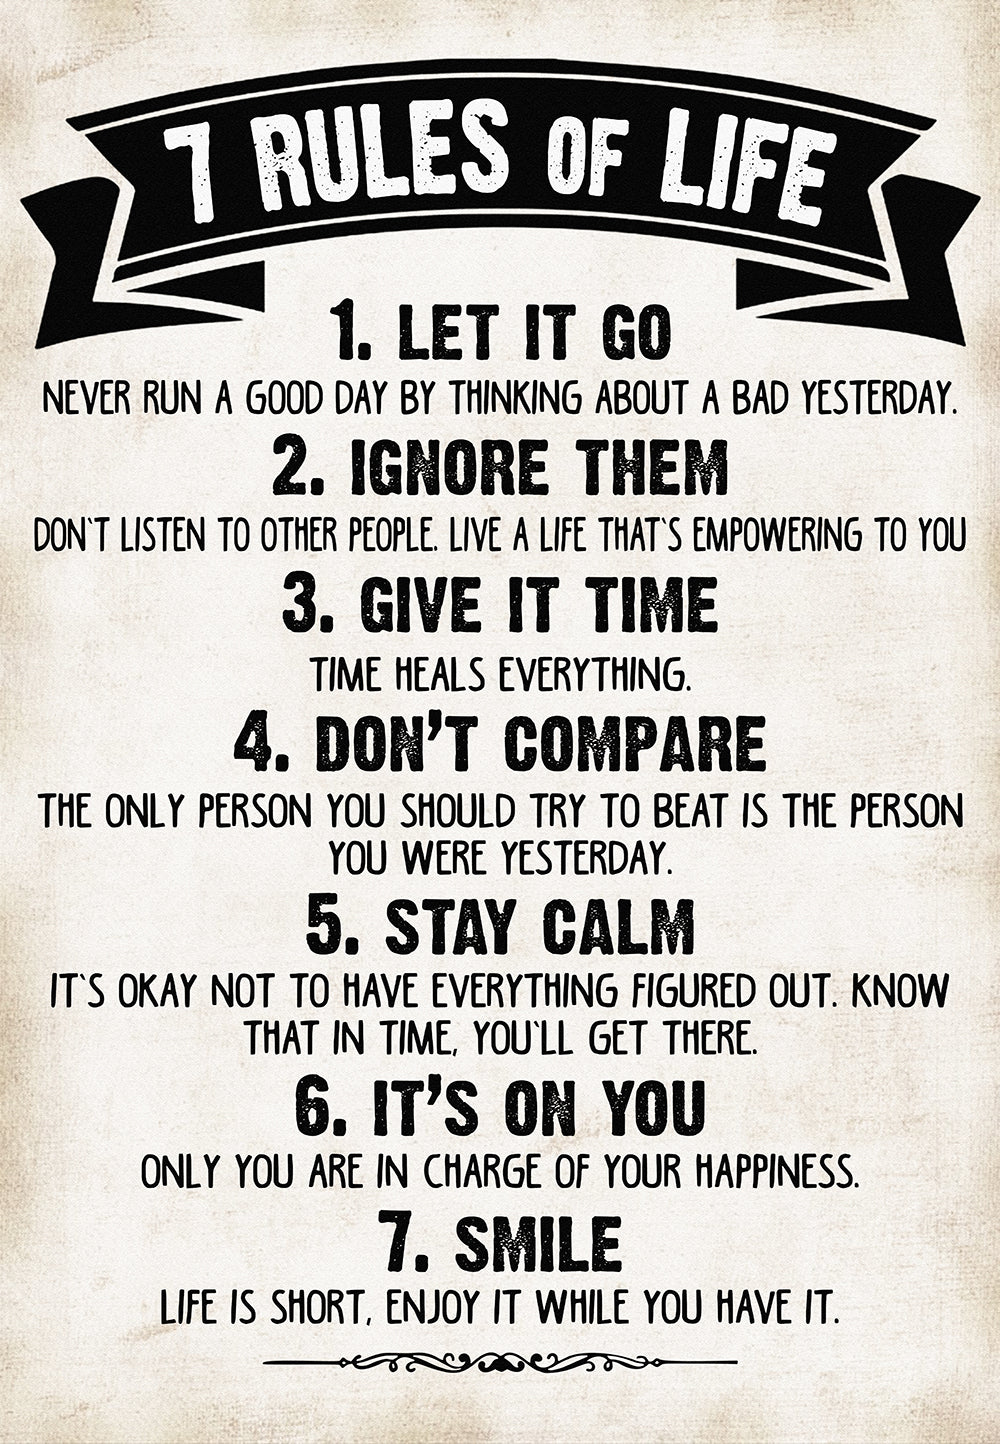 7 Rules of Life Motivational